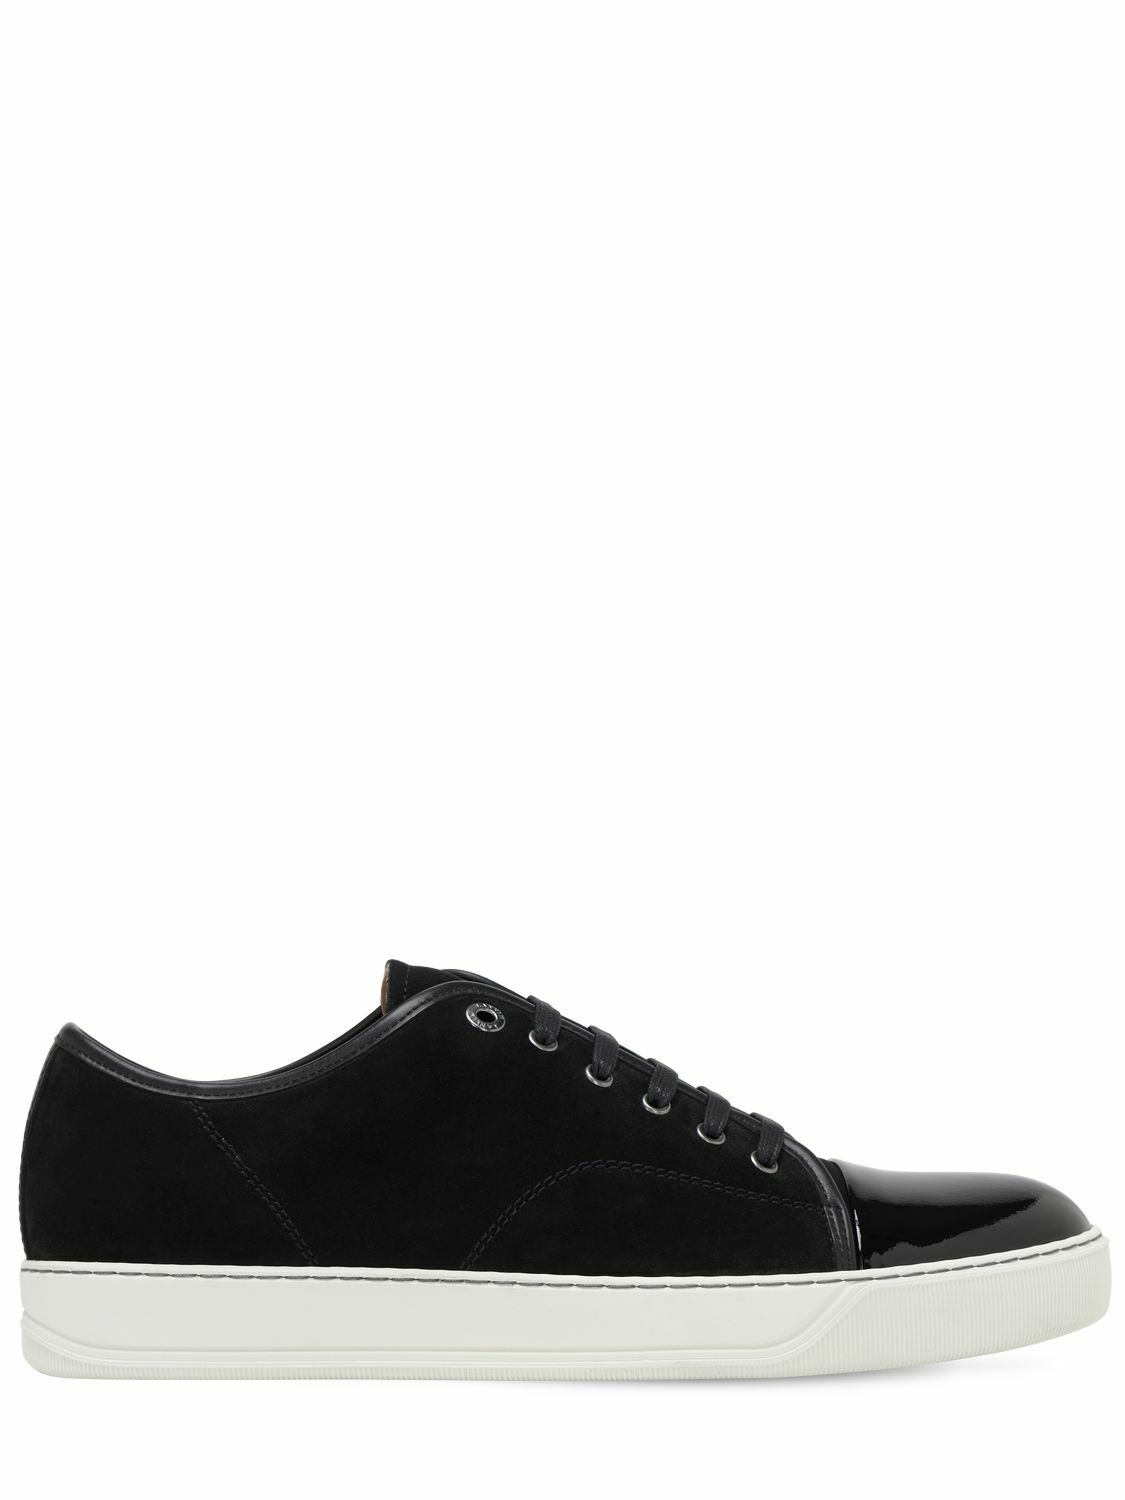 Photo: LANVIN - Suede & Leather Low Top Sneakers